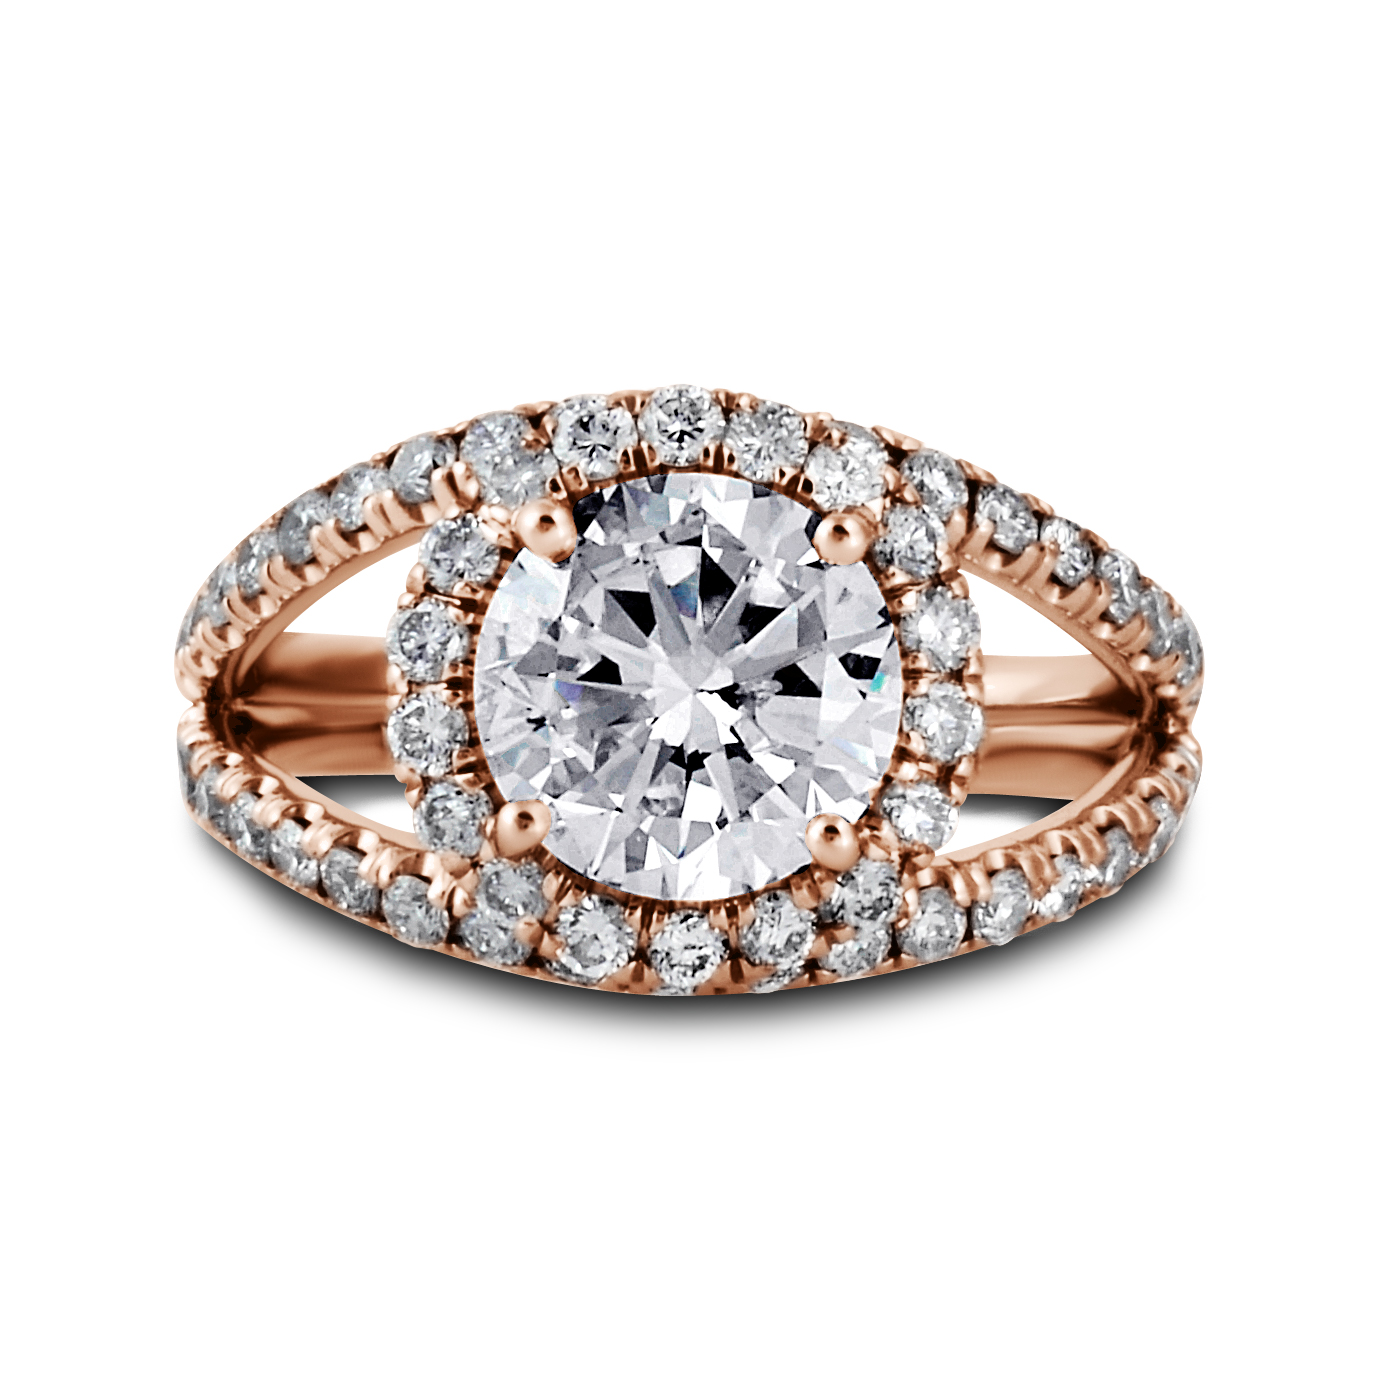 Double Band Diamond Halo Engagement Ring Rose Gold - Los Angeles Jewelry Store